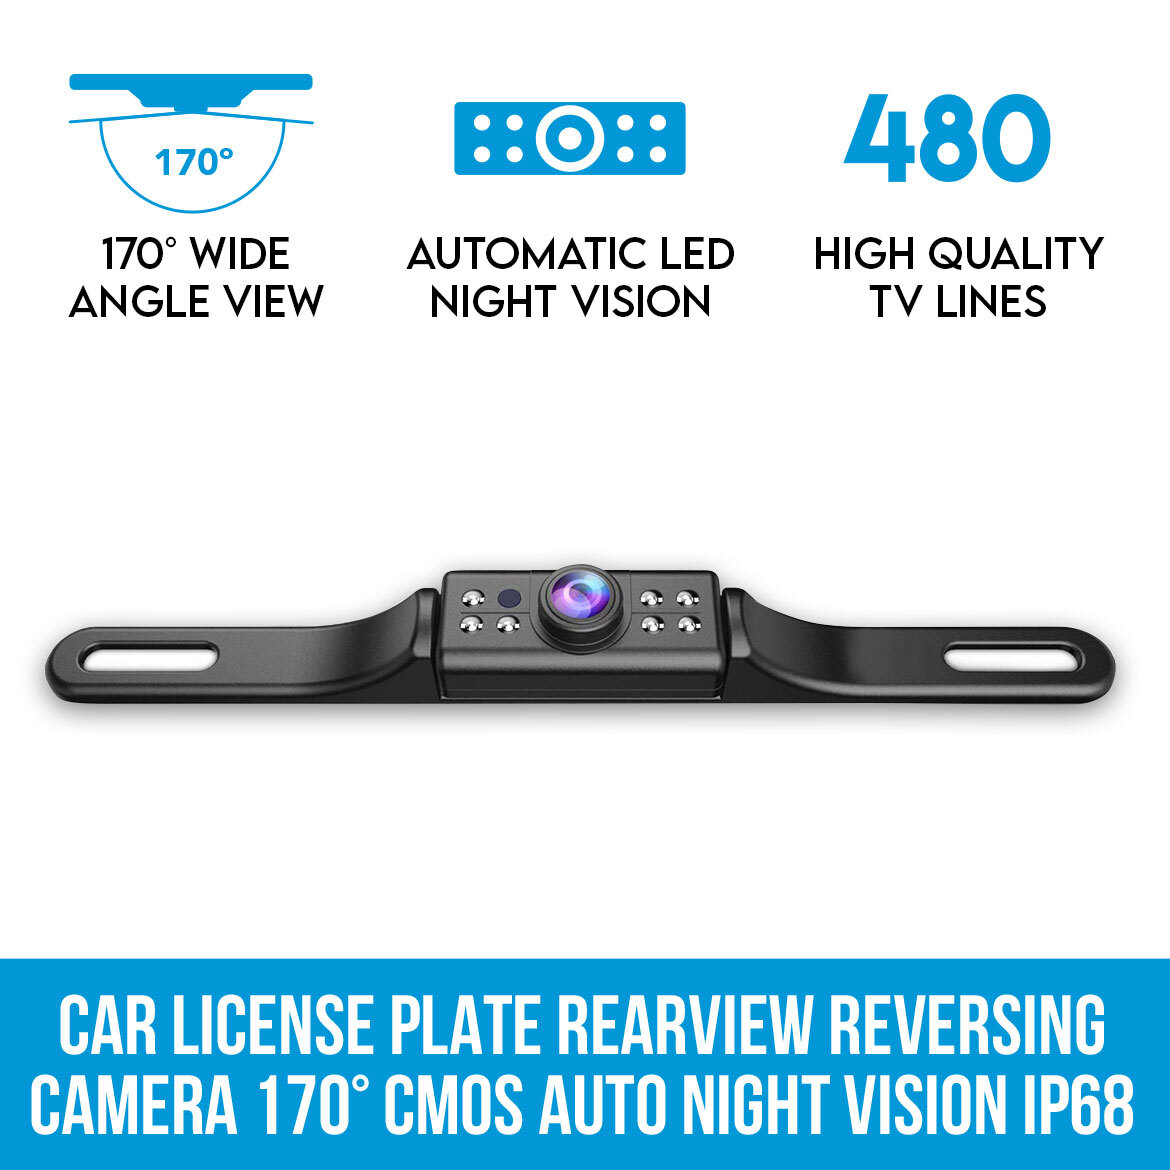 Plating process License Plate Backup Camera Rear View Camera 170° Viewing Angle Universal Car License Plate Frame Mount Rearview Camera Waterproof High Sensitive 8 IR LED Night Vision Reverse Aid 